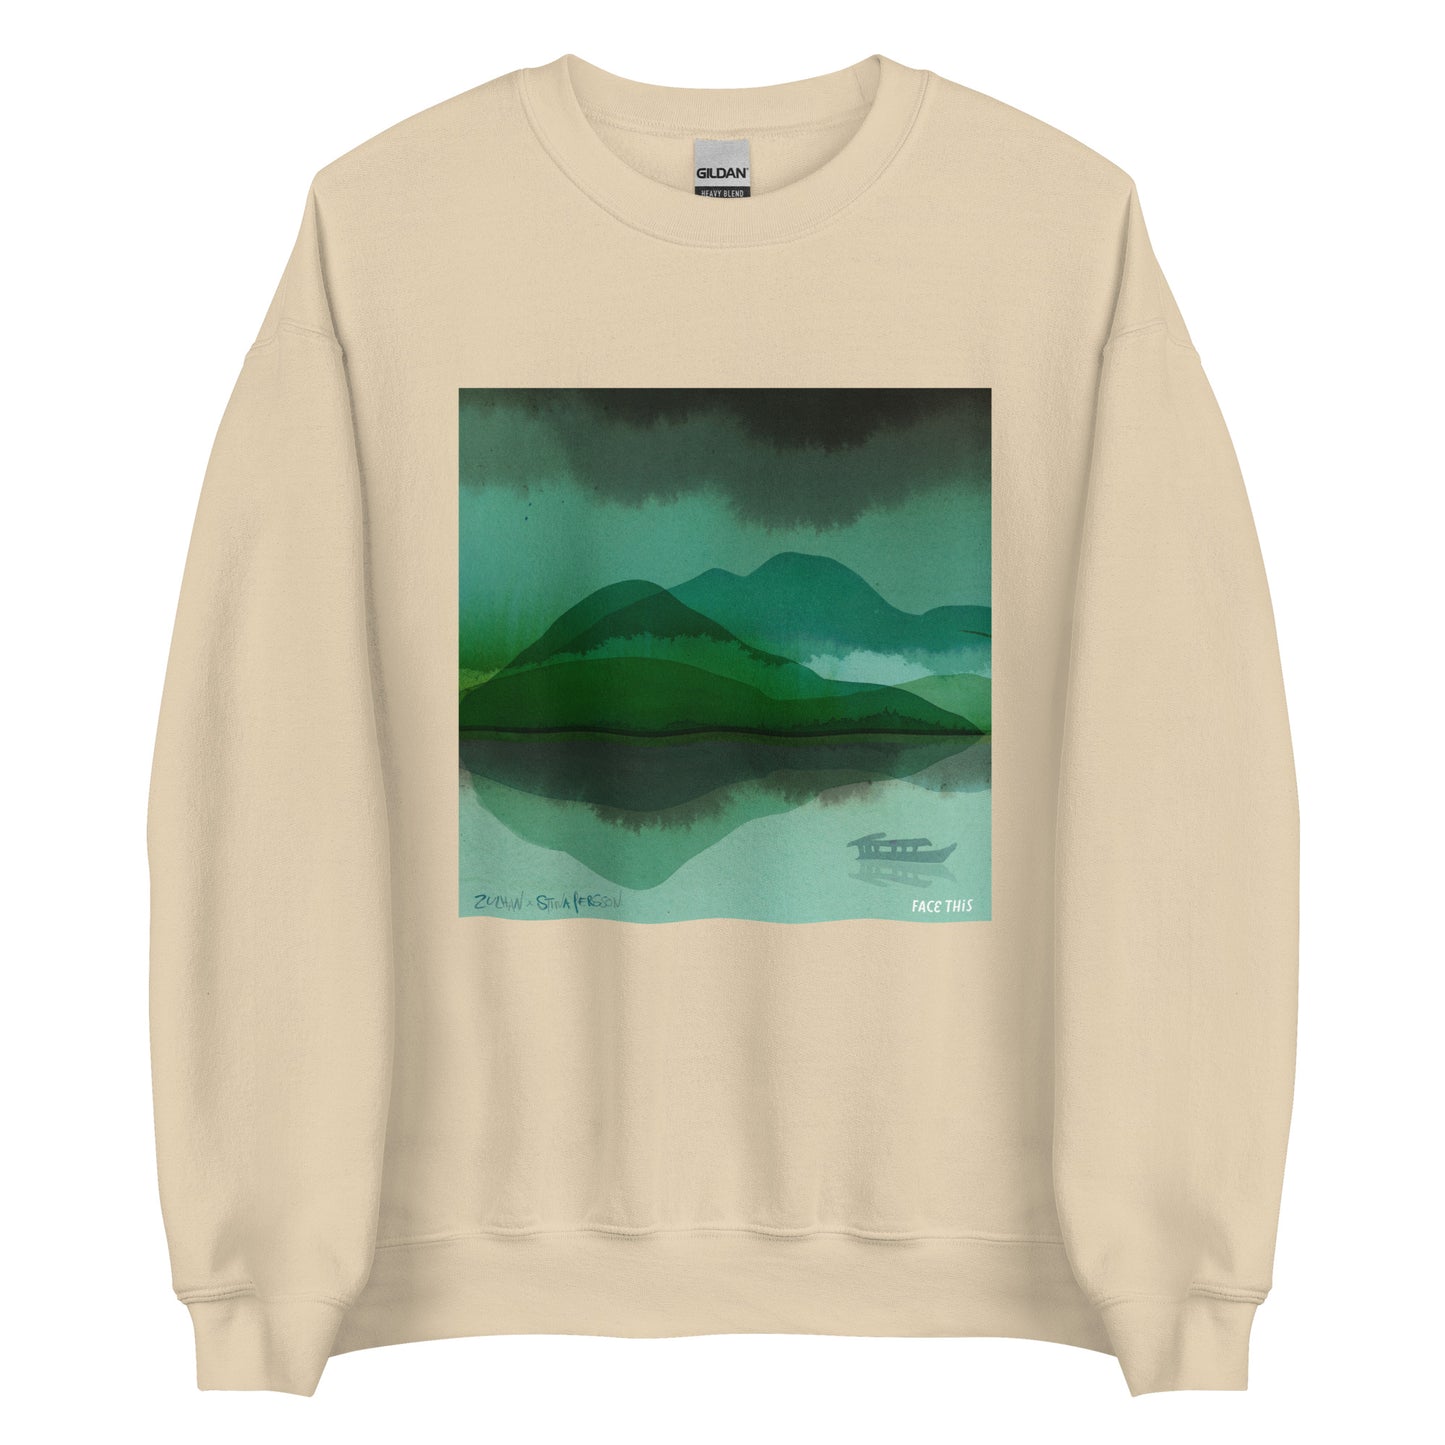 Stina Persson x Zulhan Face This sweater